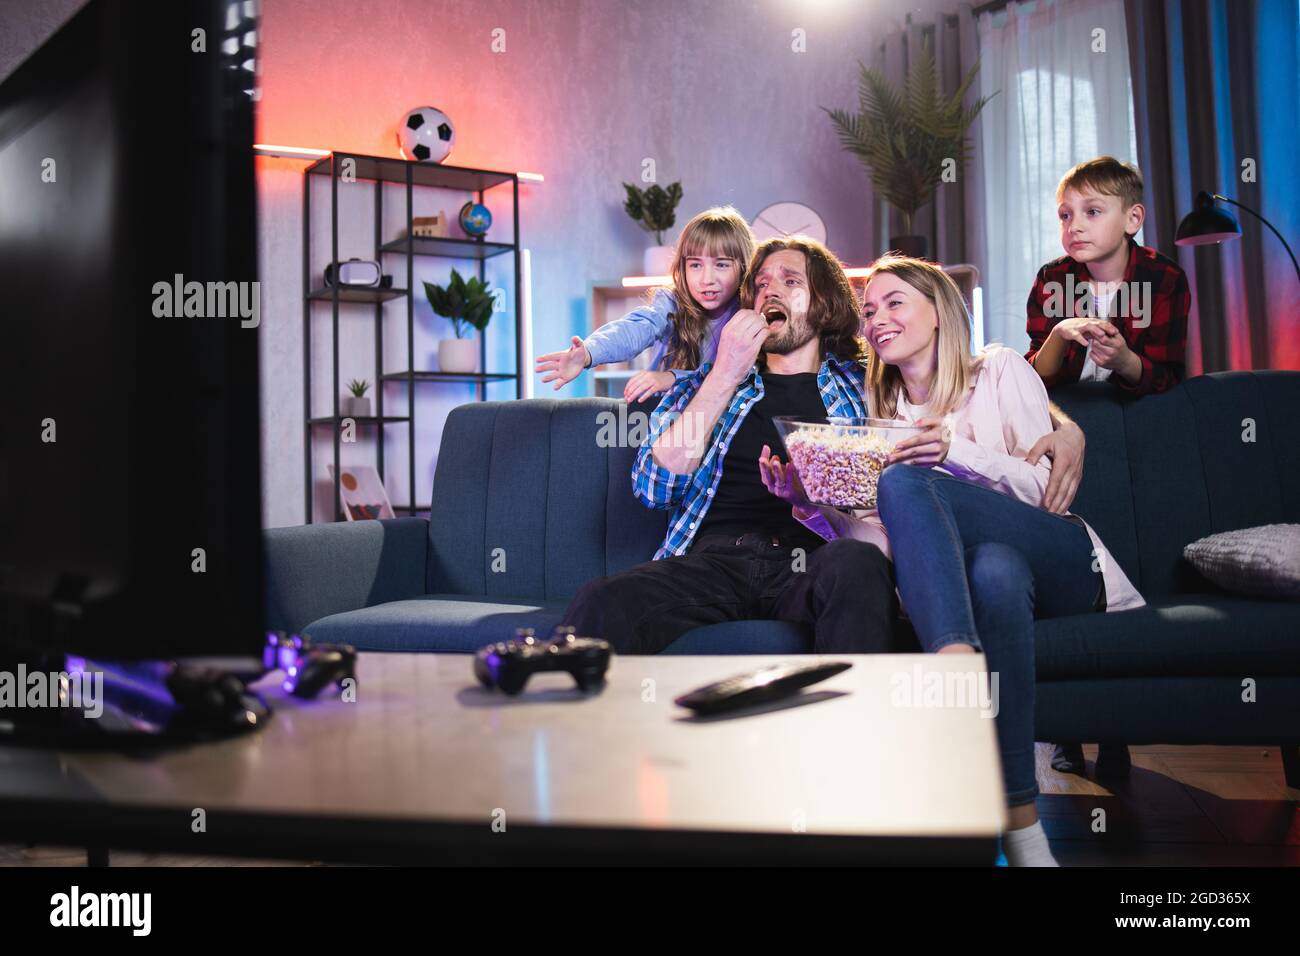 Relaxed parents with two children eating popcorn and watching TV at home. Caucasian family spending evening time together. Concept of leisure and lifestyles. Stock Photo